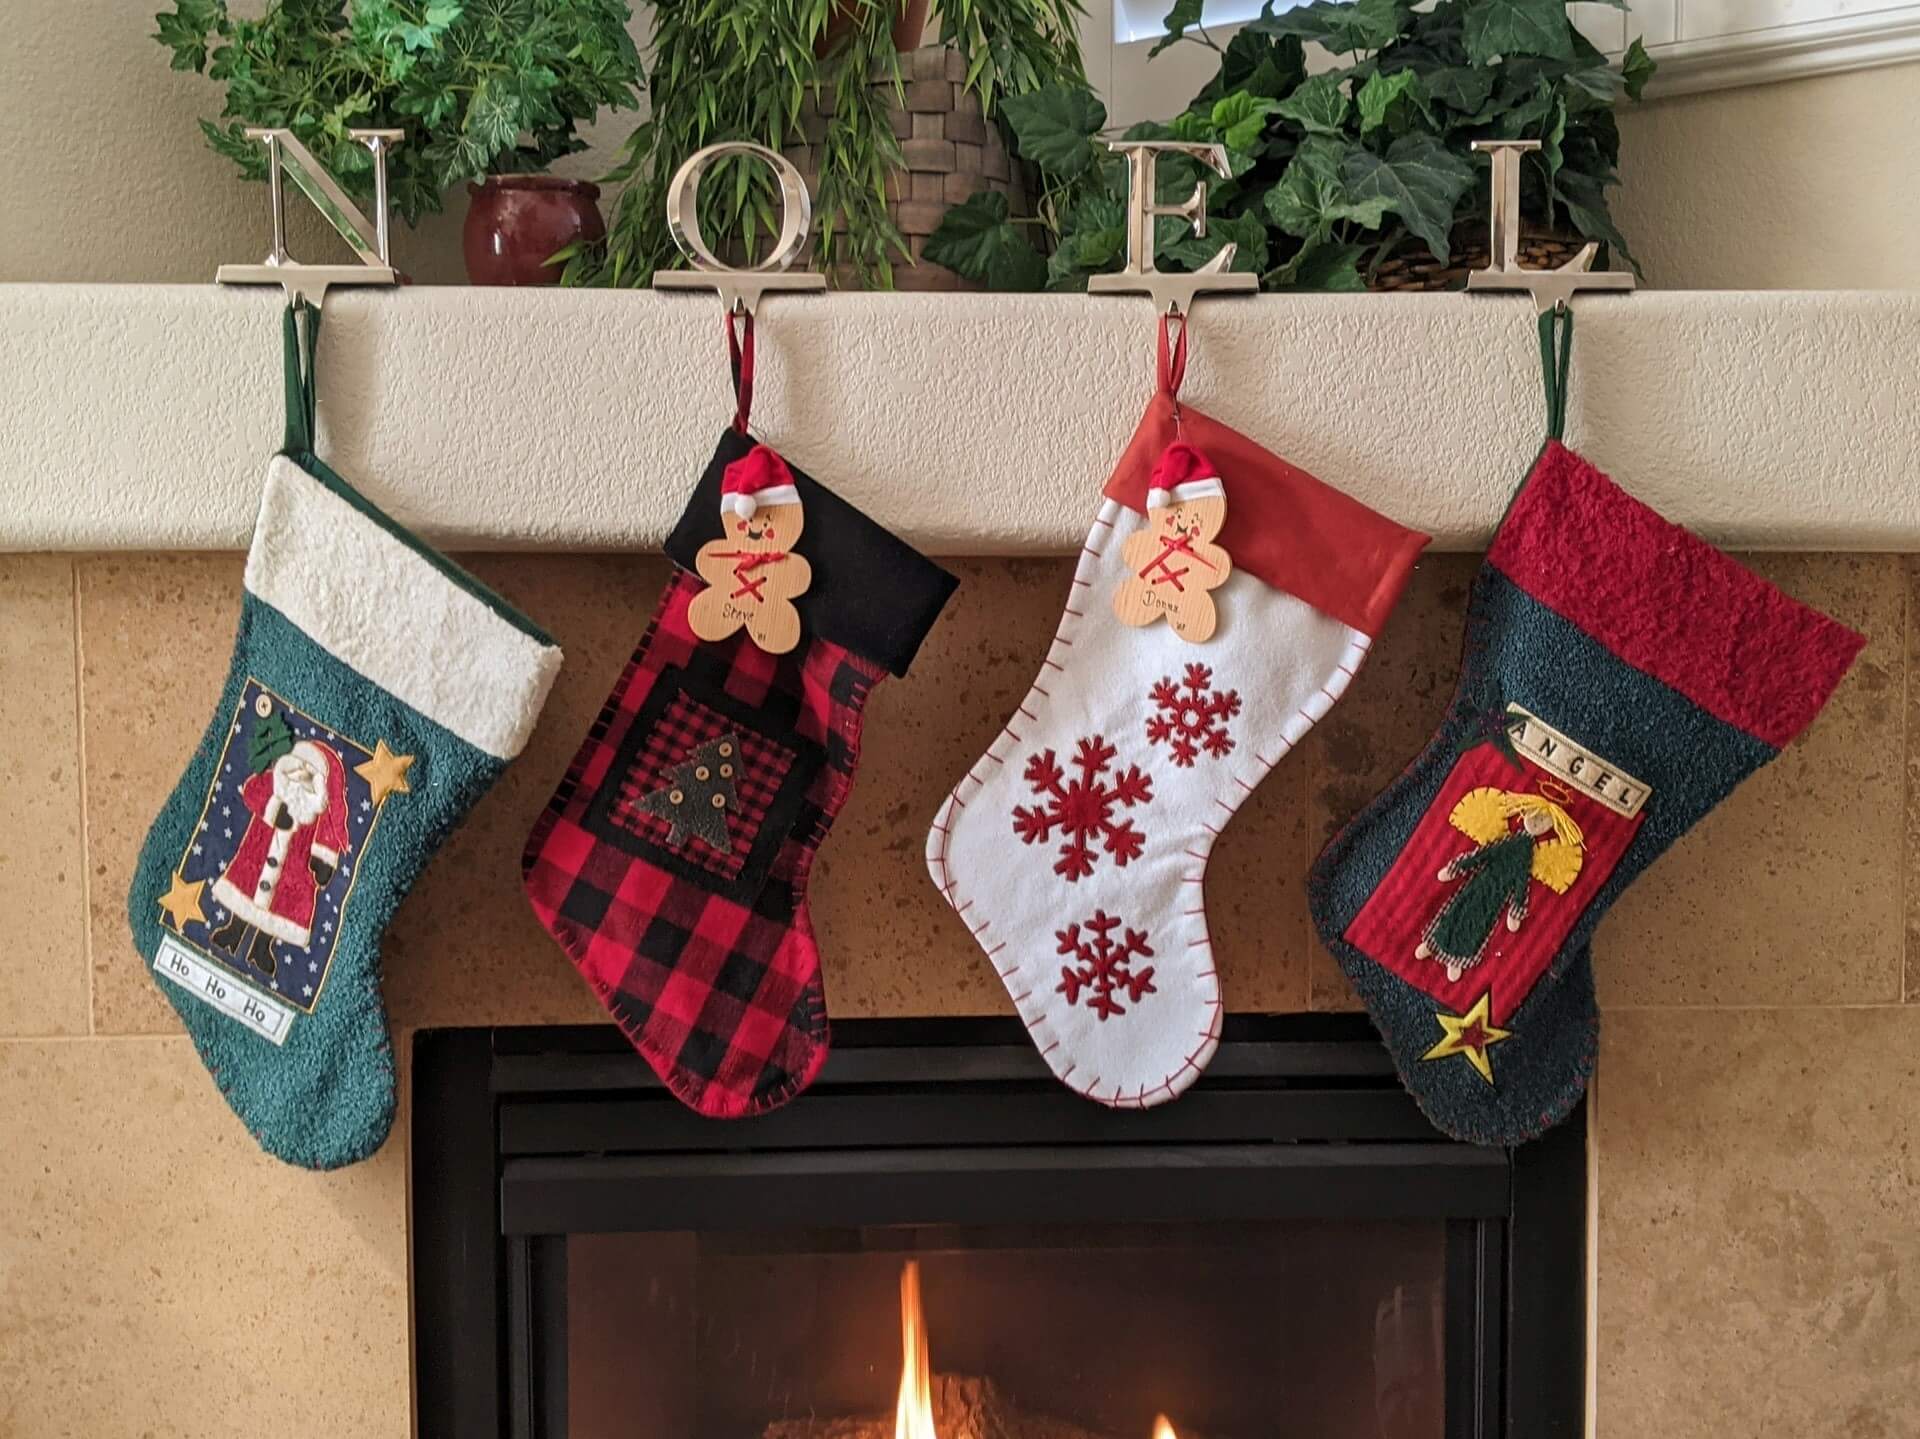 10 Tips to Make your Home Cozier for the Holidays